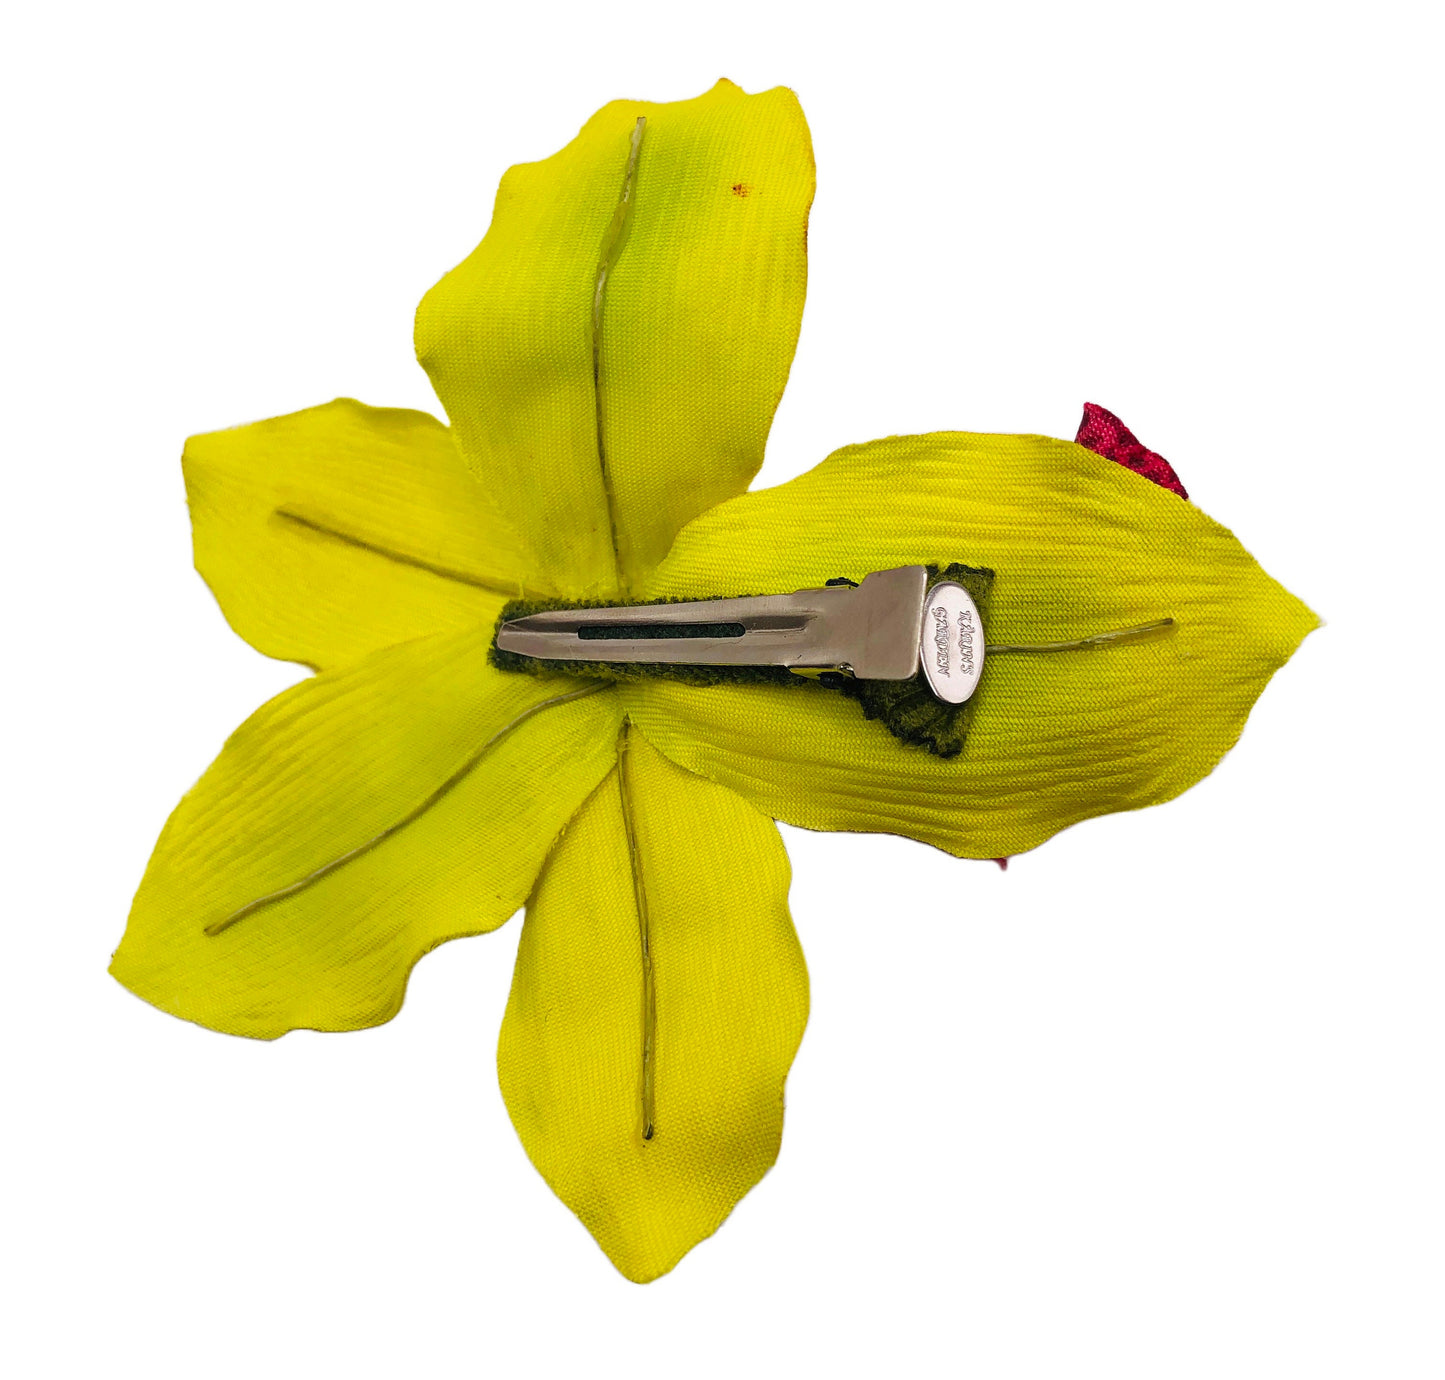 Karin's Garden 3 1/2" White Vanda Orchid Clip Made in the USA As Seen In: SHOP Magazine